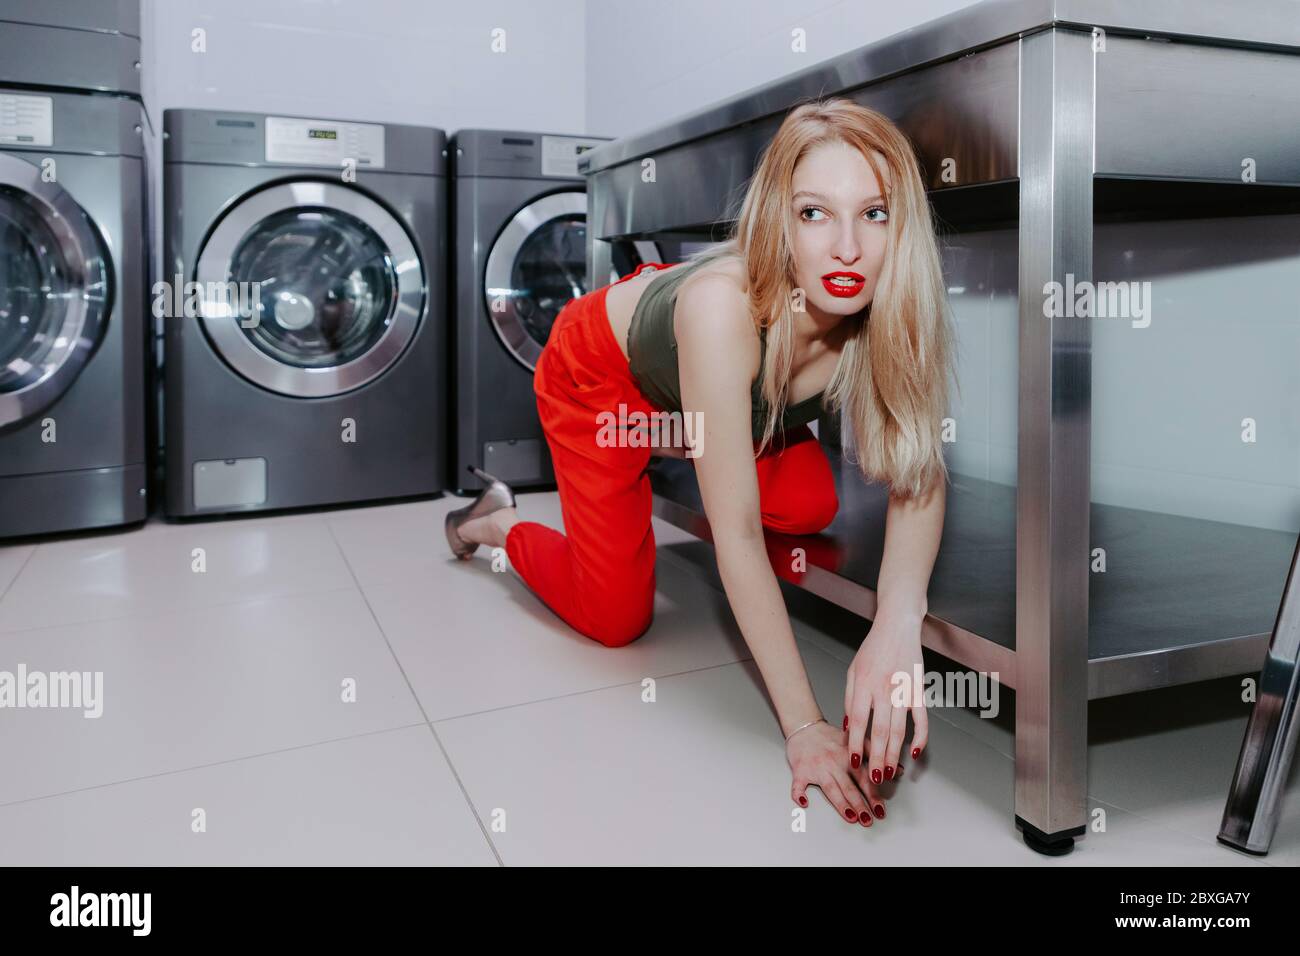 Pretty female crawls from under table in a laundry; laundry machines in background; she wears bright red trousers, high heels & a top; bright red lips Stock Photo